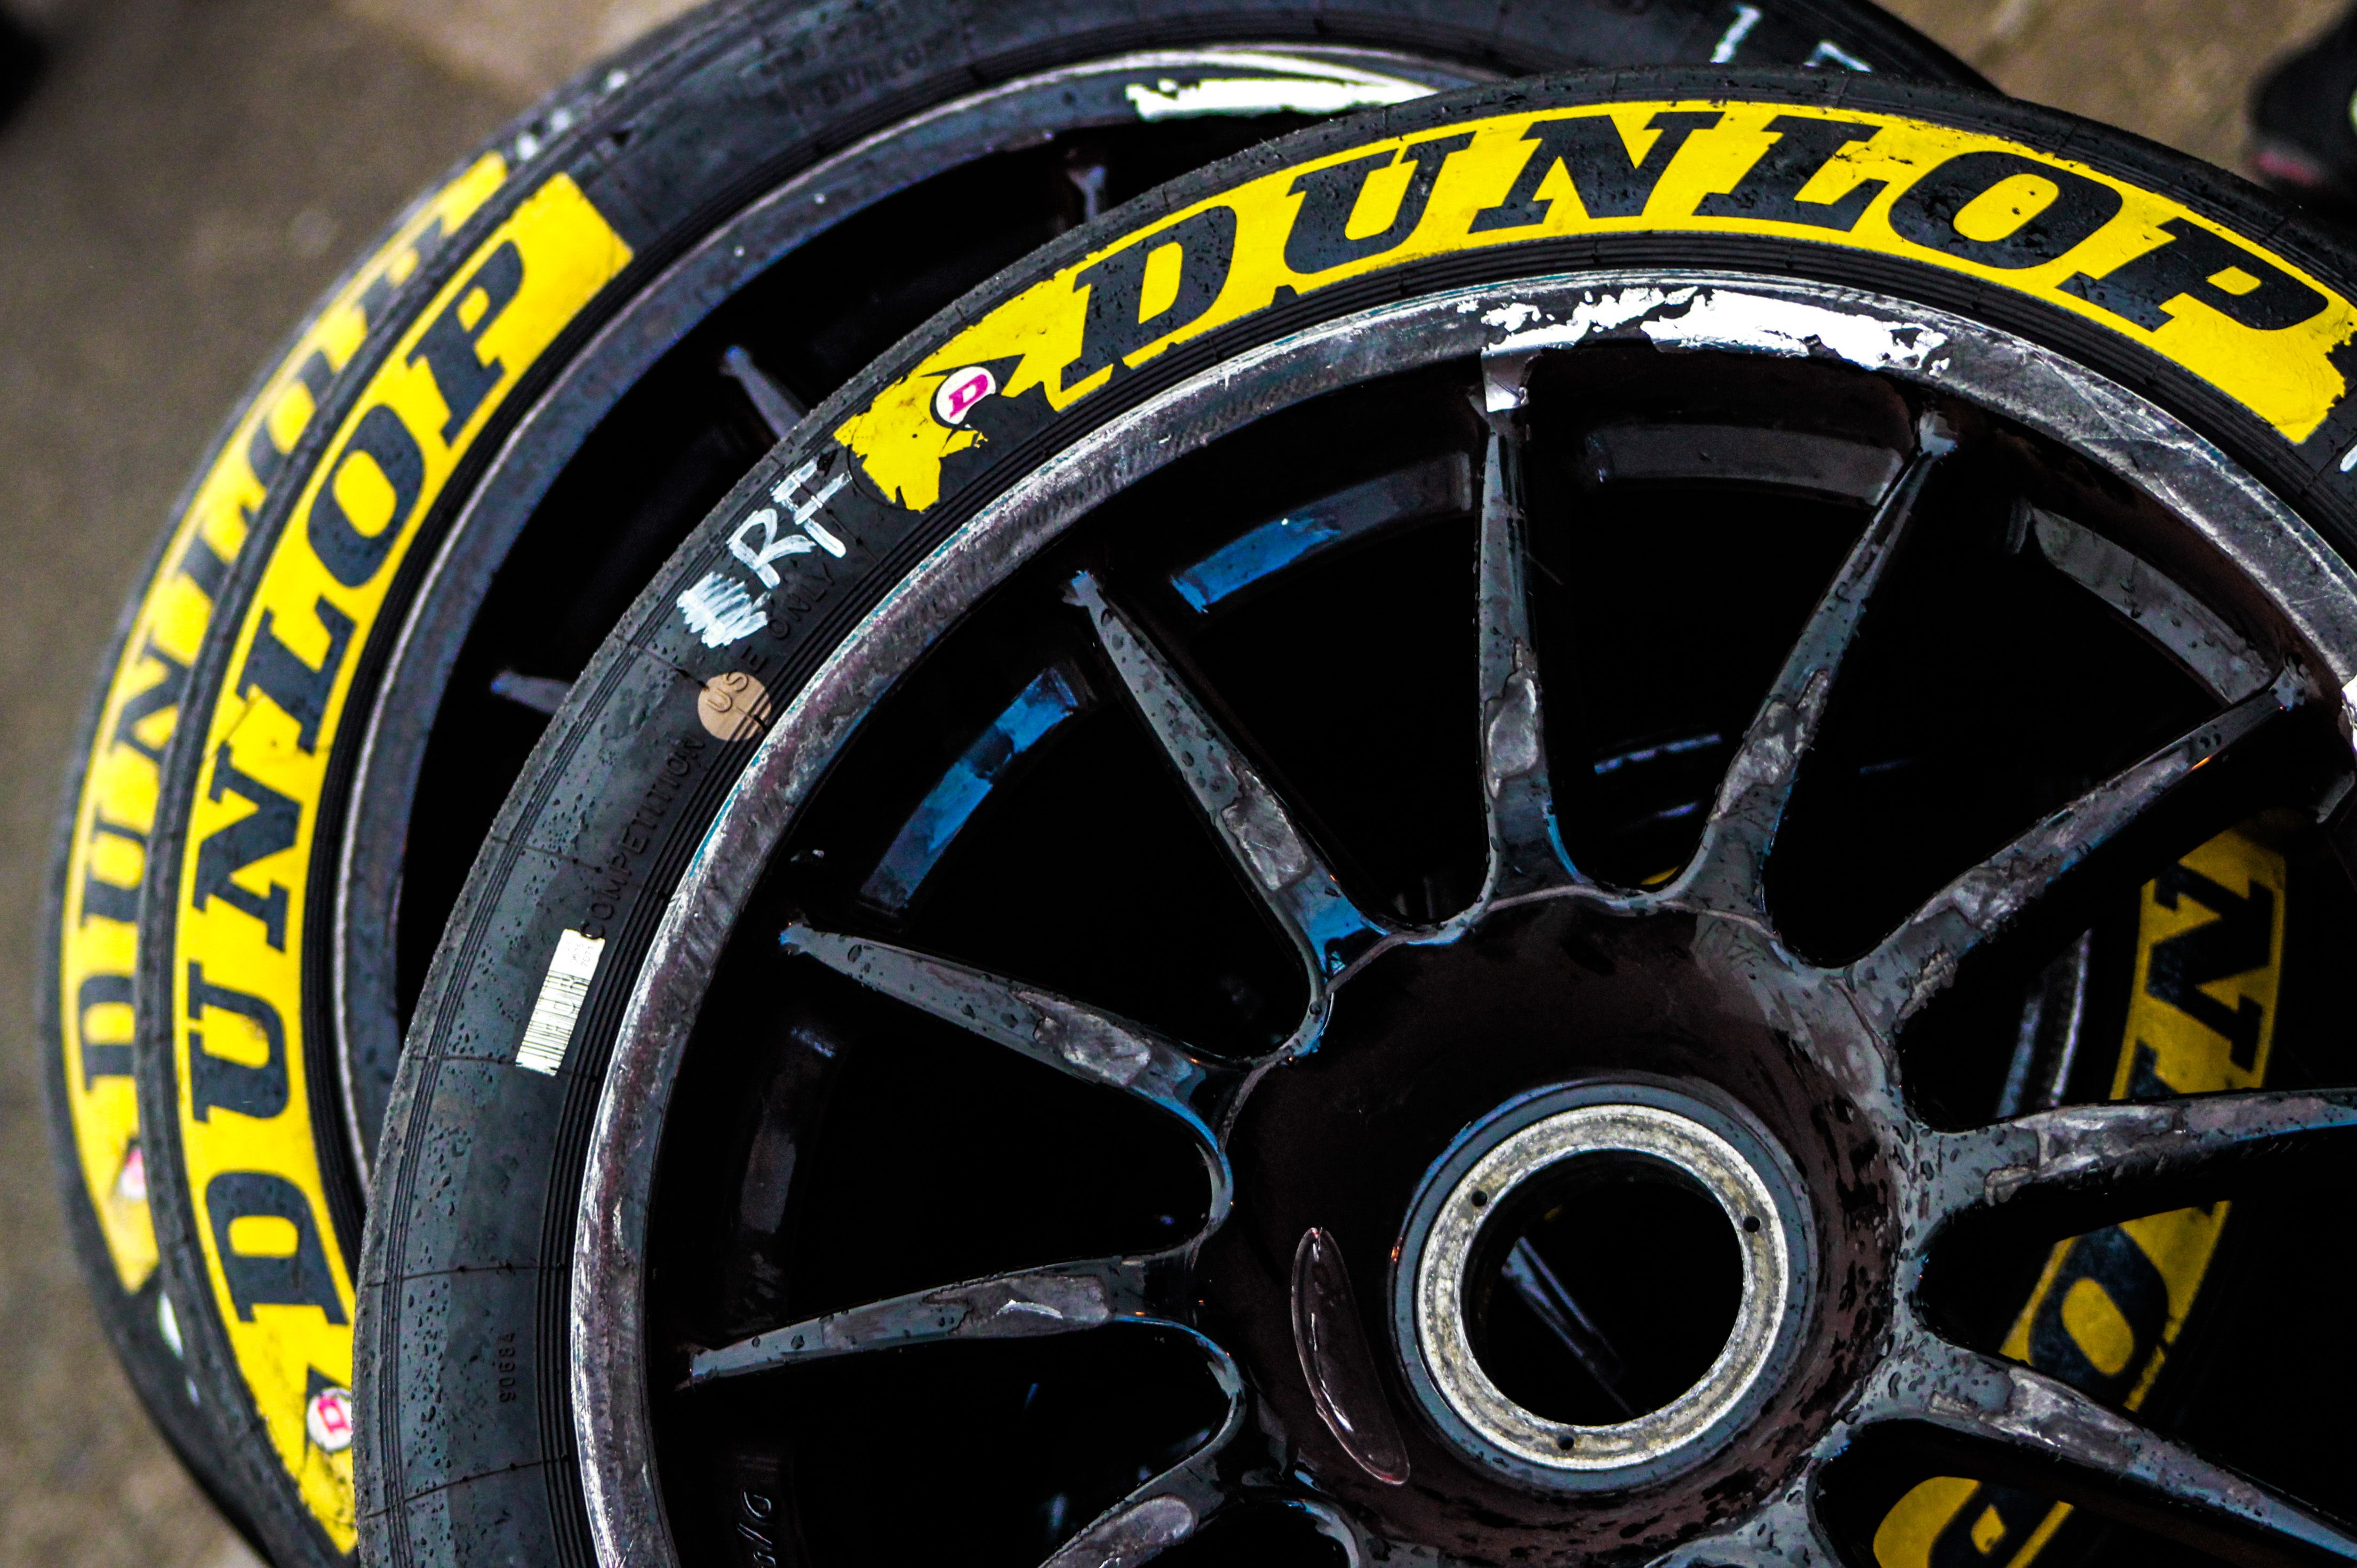 Rebellion Racing join forces with Dunlop for 2016